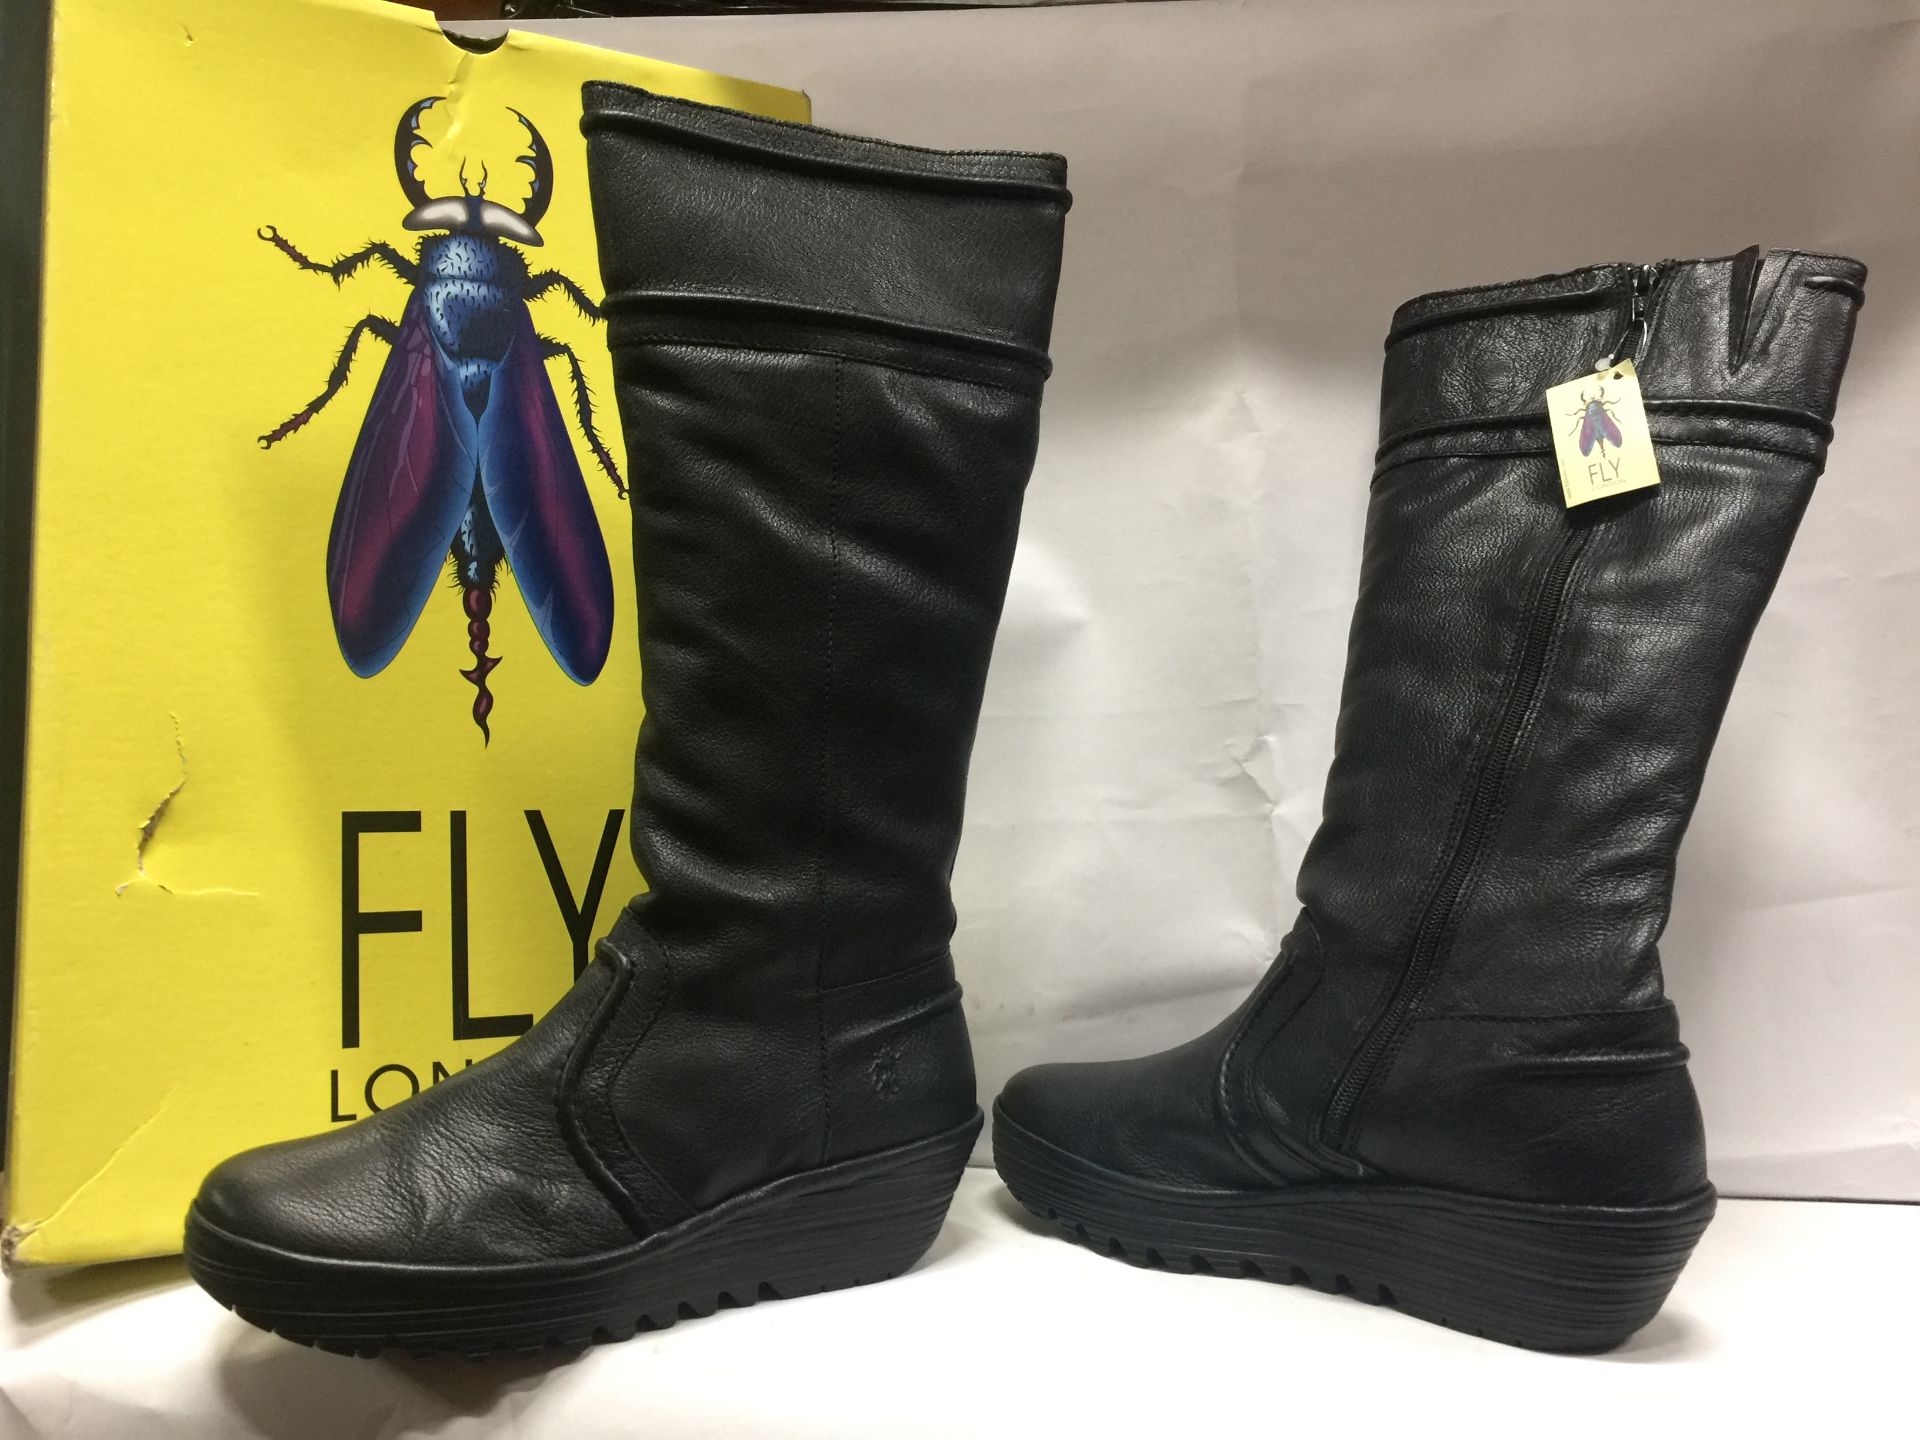 5 x Fly London Women's Boots Mixed Sizes, Styles and Colours Size Ranging EU 39 - EU 42 - Customer R - Image 2 of 4